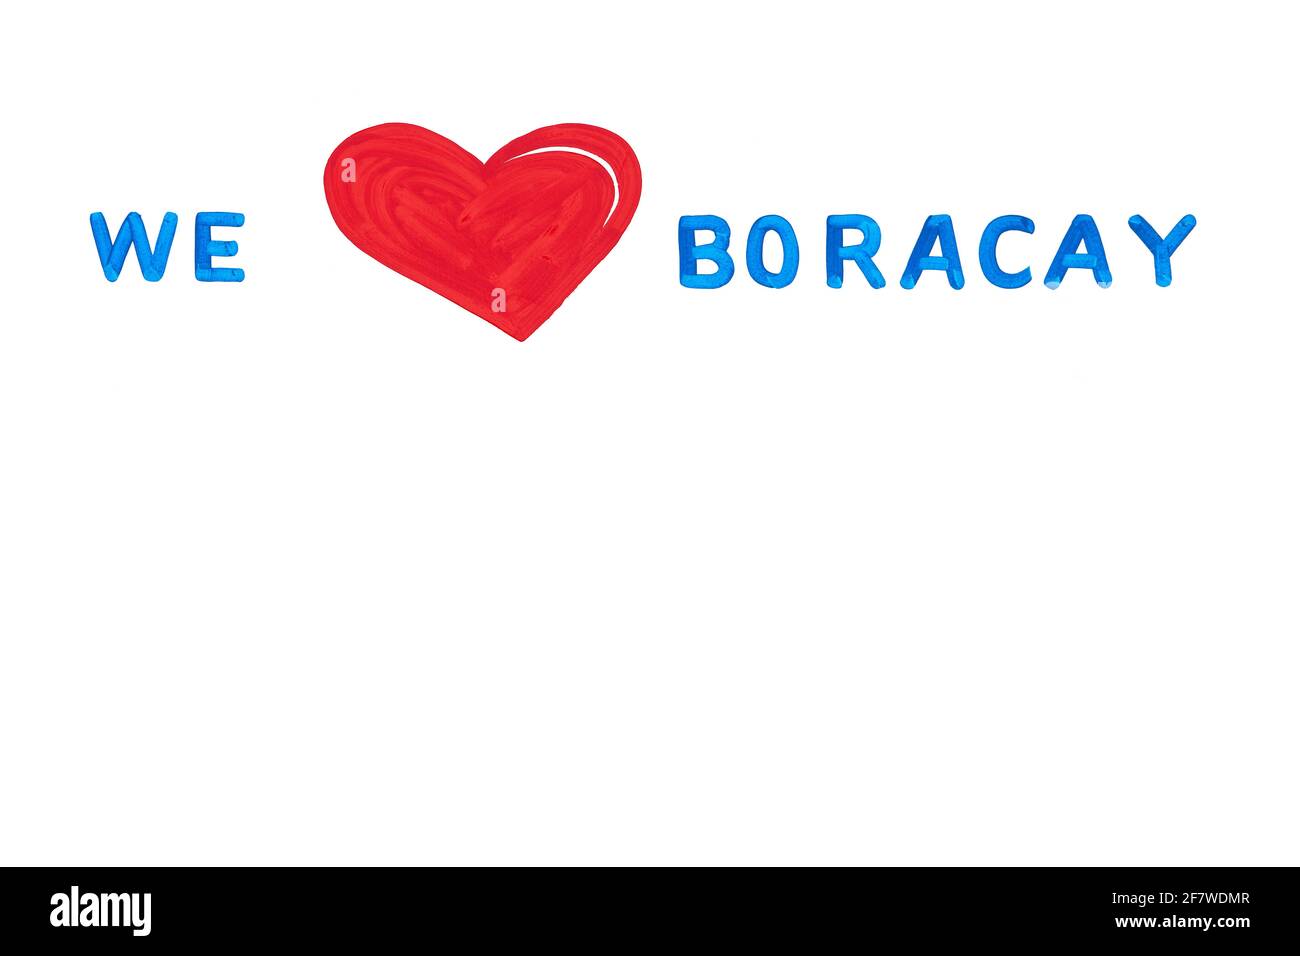 Illustration of blue colored text 'We Love Boracay' with a red painted heart as love symbol. The slogan is placed on a plain white colored background Stock Photo